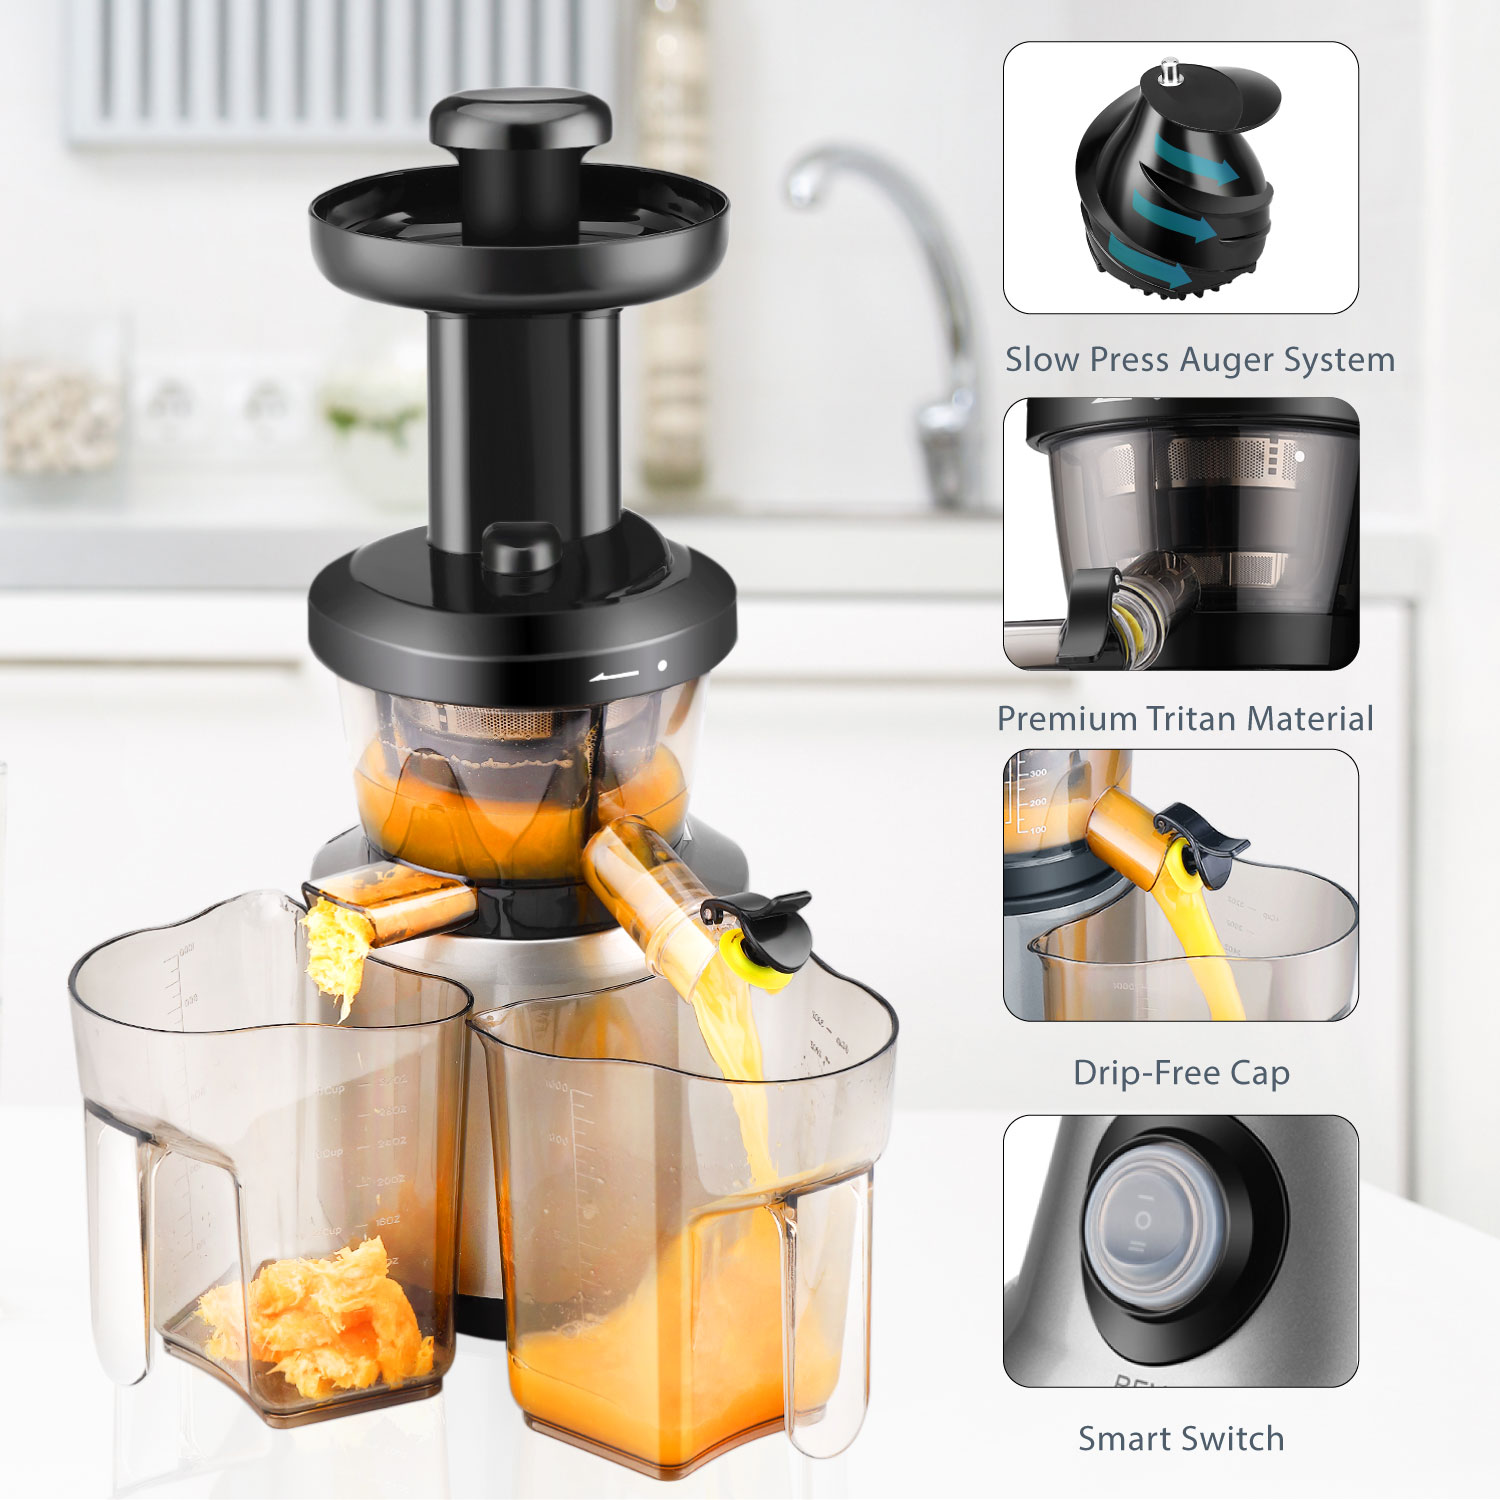 The juicer also removes excess pulp from the juice that is not wanted. It comes with two strainers, coarse strainer and fine strainer, both are available to help control the amount of pulp you wish